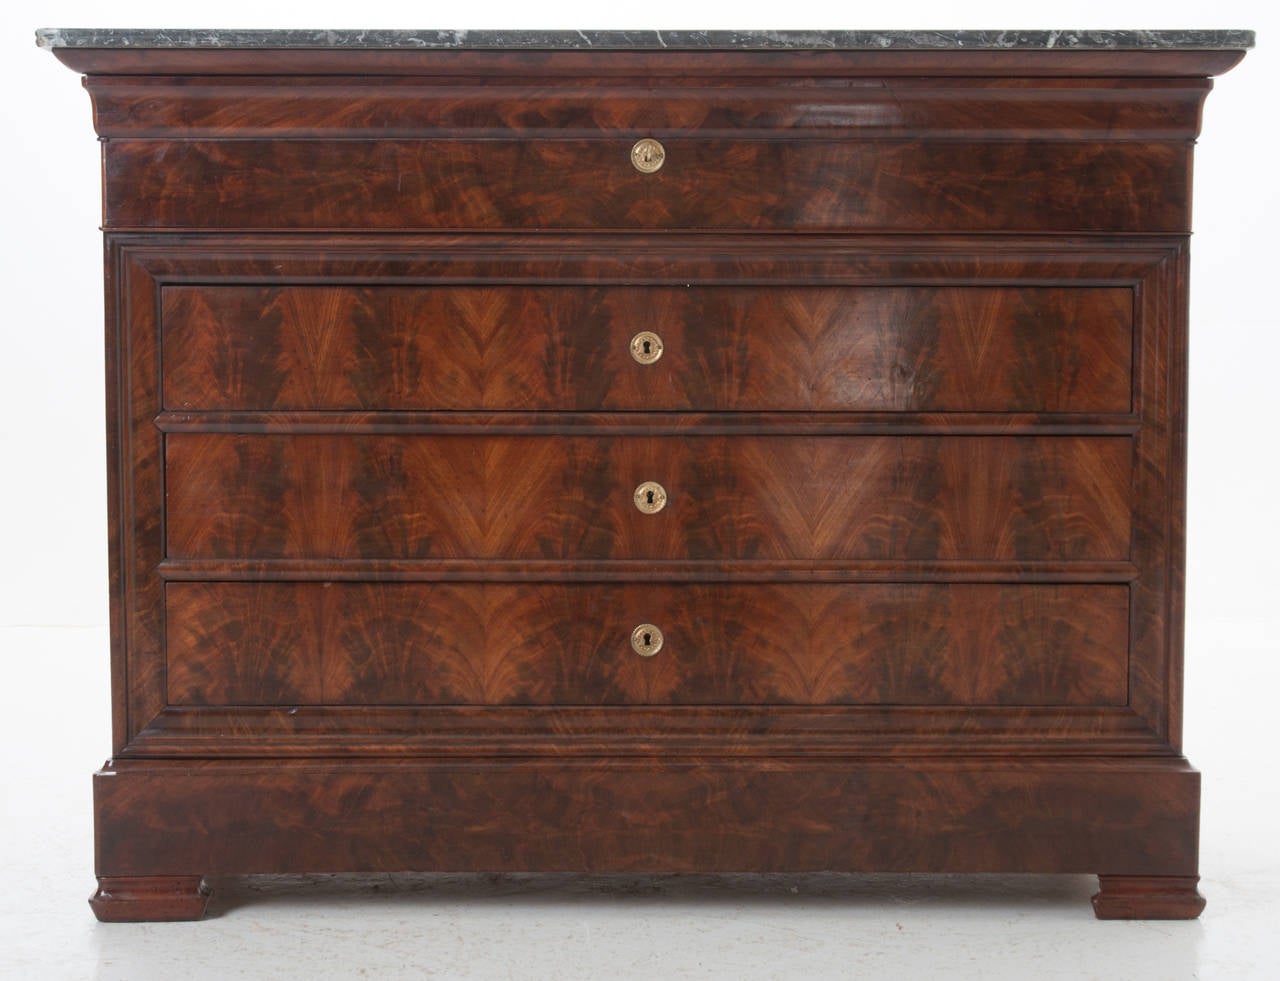 The commode / secretary is always one of our favorite antiques to have in the shop, we love the hidden treasures. The original marble top sits over this fine commode of 4 drawers and 1 desk. The interior of the desk is fitted with 3 drawers and one